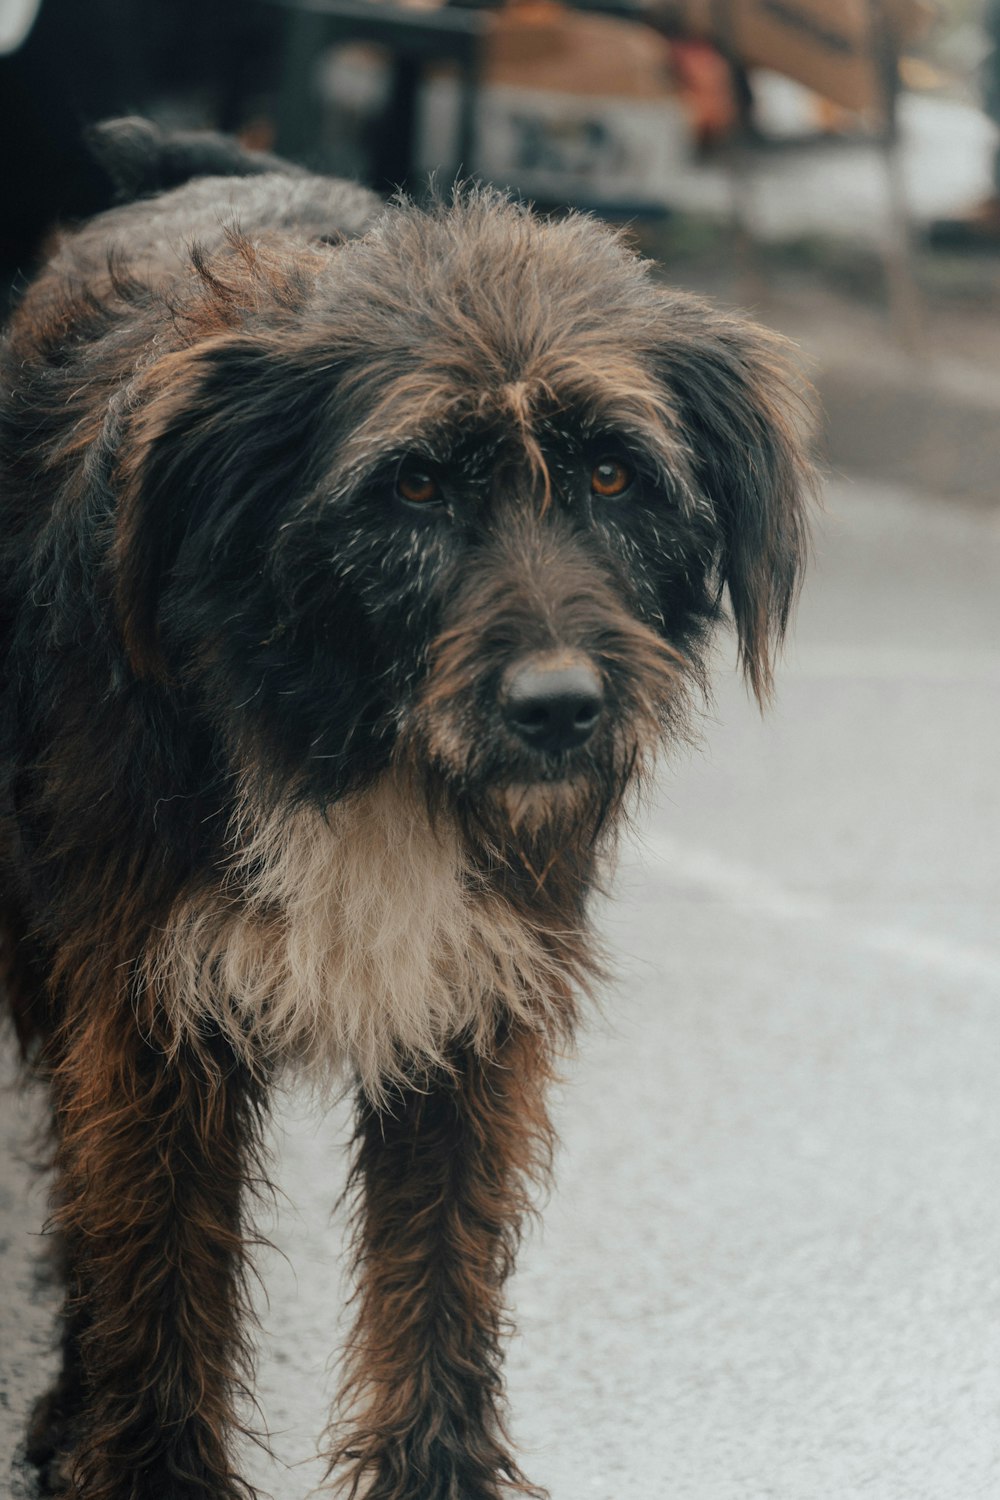 a shaggy dog standing on the side of a road